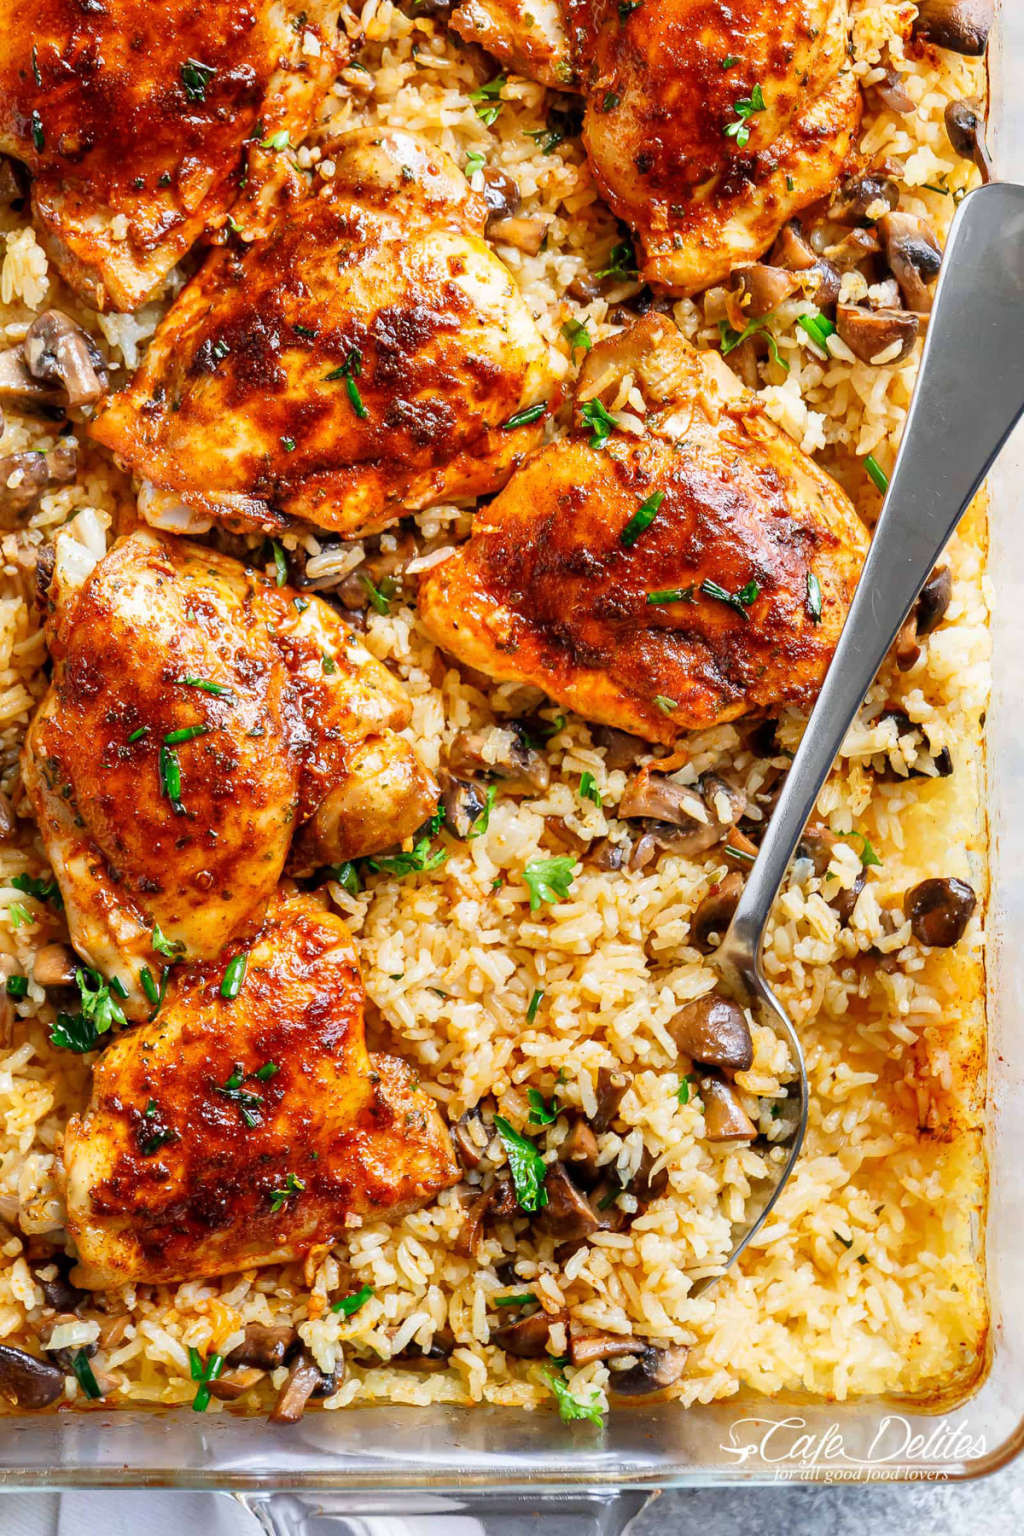 Bone In Chicken Recipes For Dinner
 Oven Baked Chicken and Rice Cafe Delites